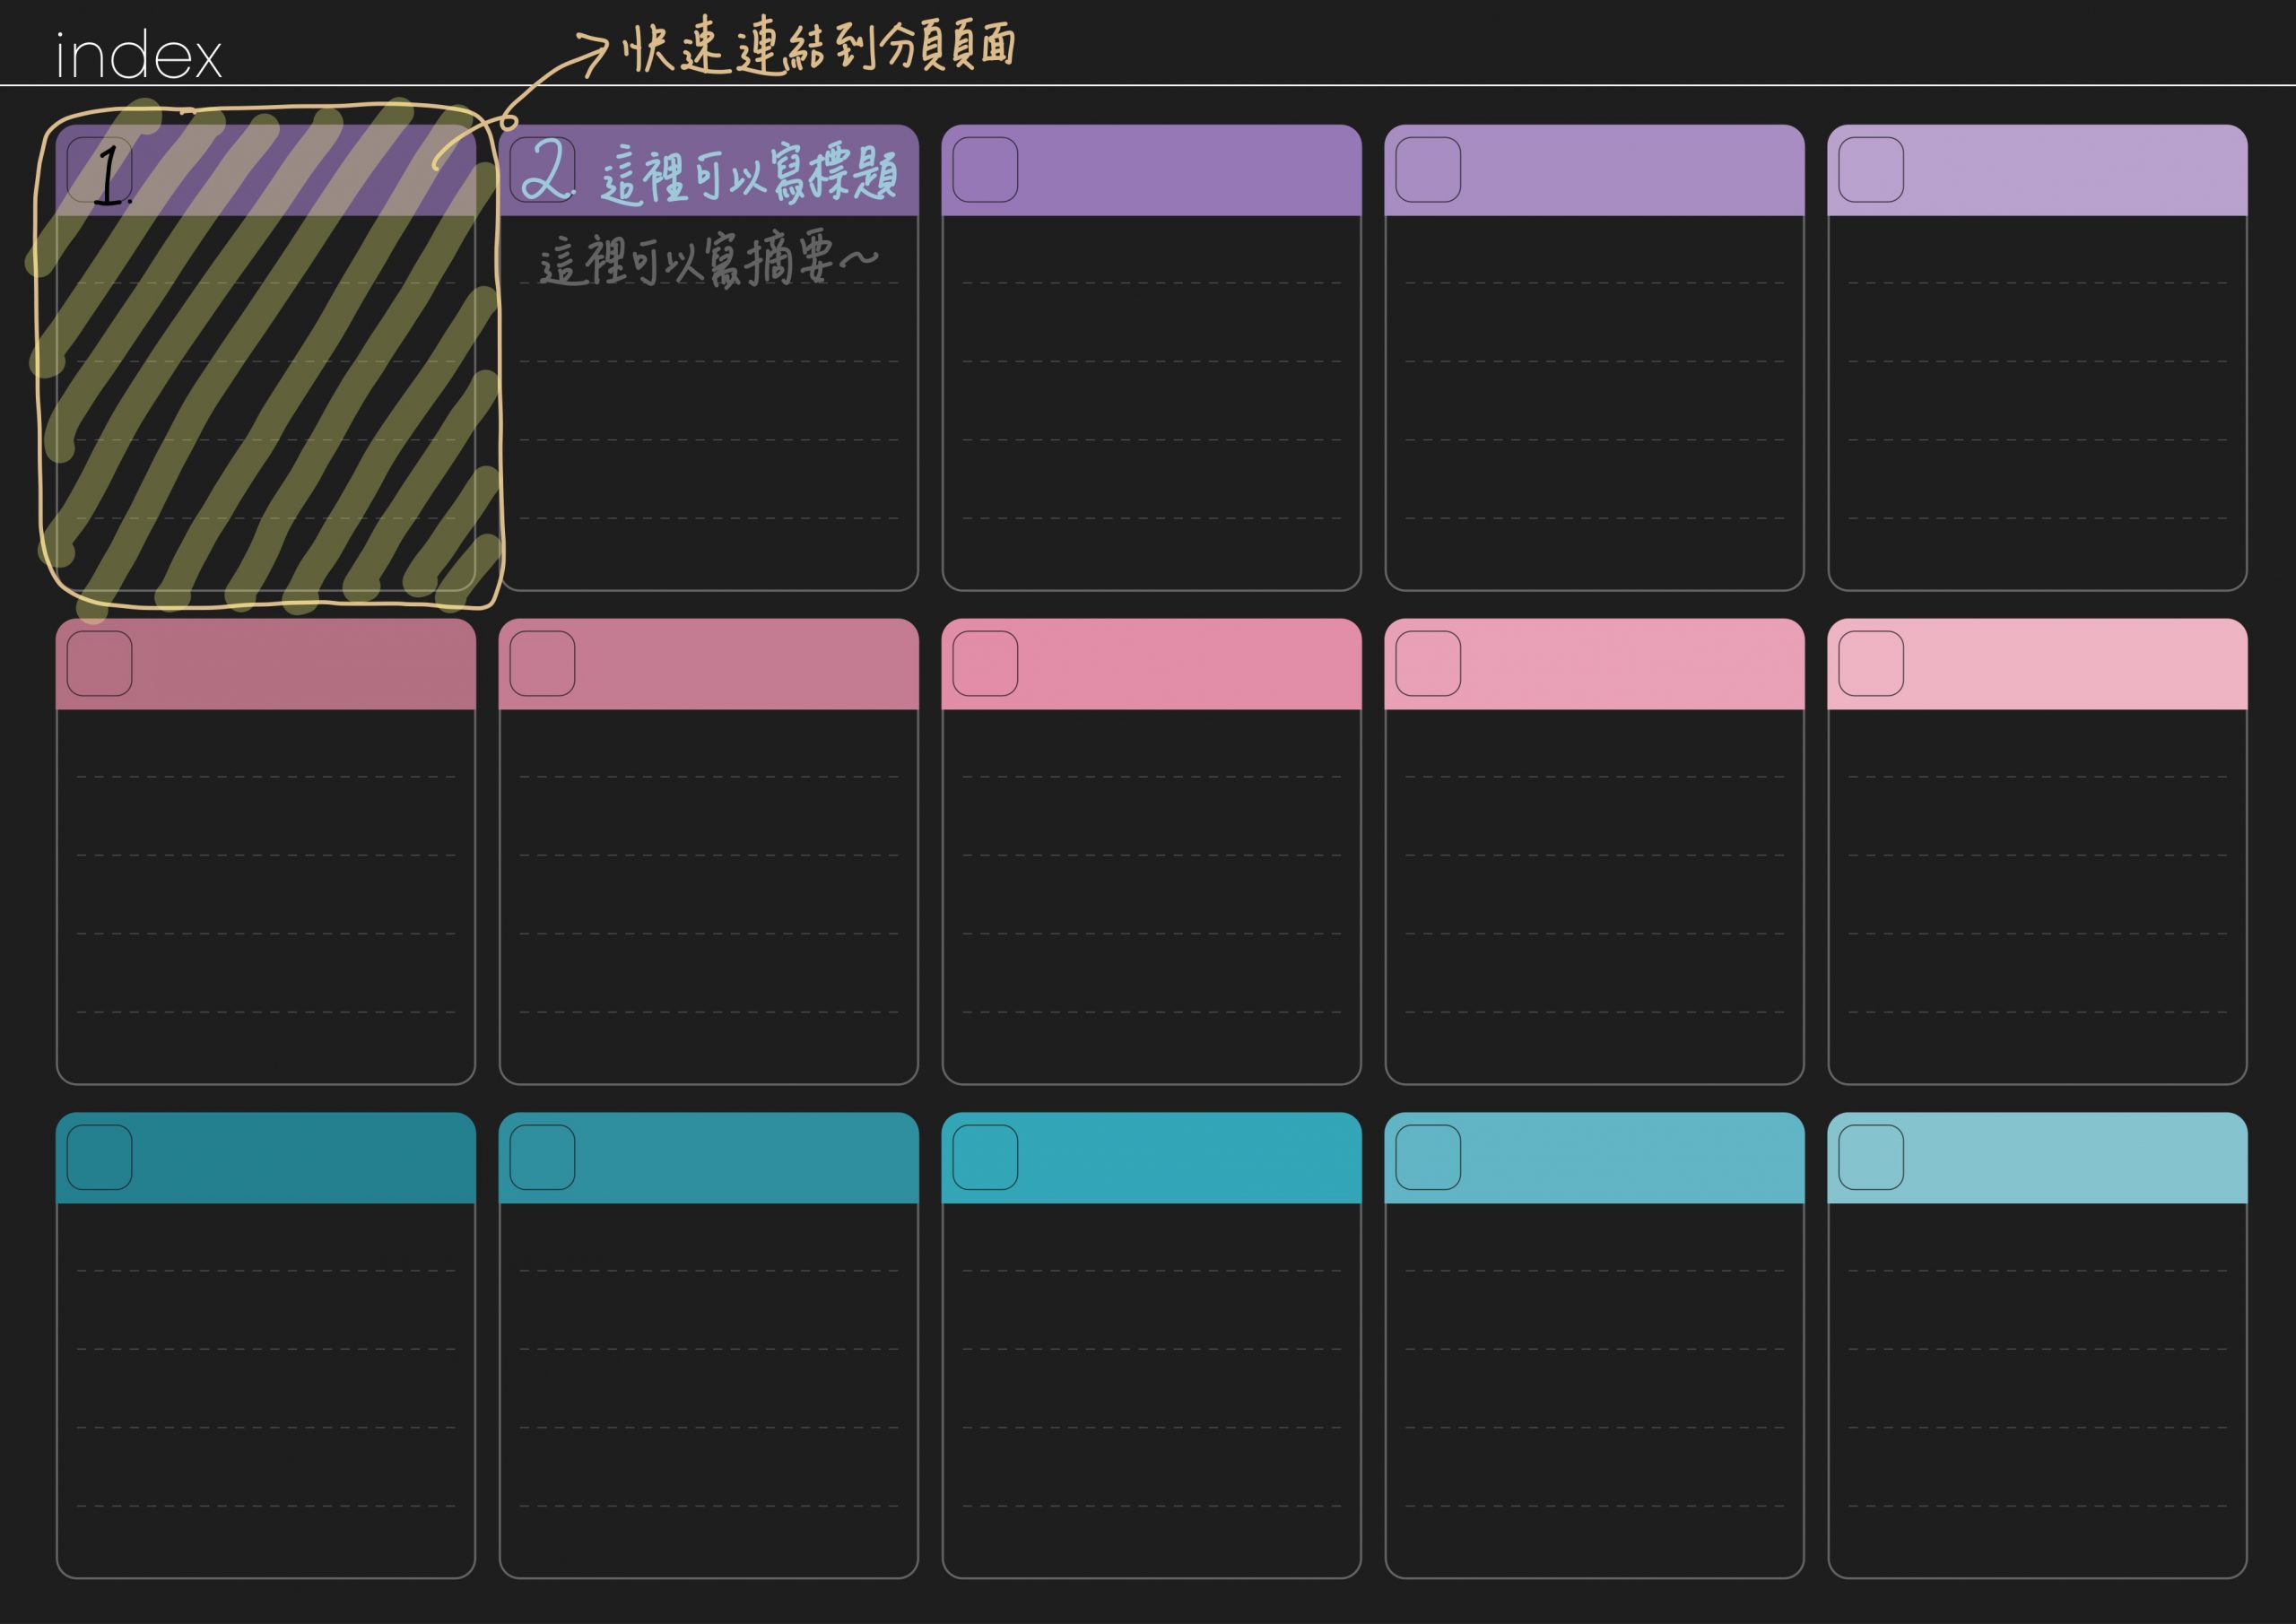 Notebook-Landscape-Solid Color Cover-15 Tabs-Tornado Bubble Dreamland-Dark Mode 索引手寫說明 | me.Learning